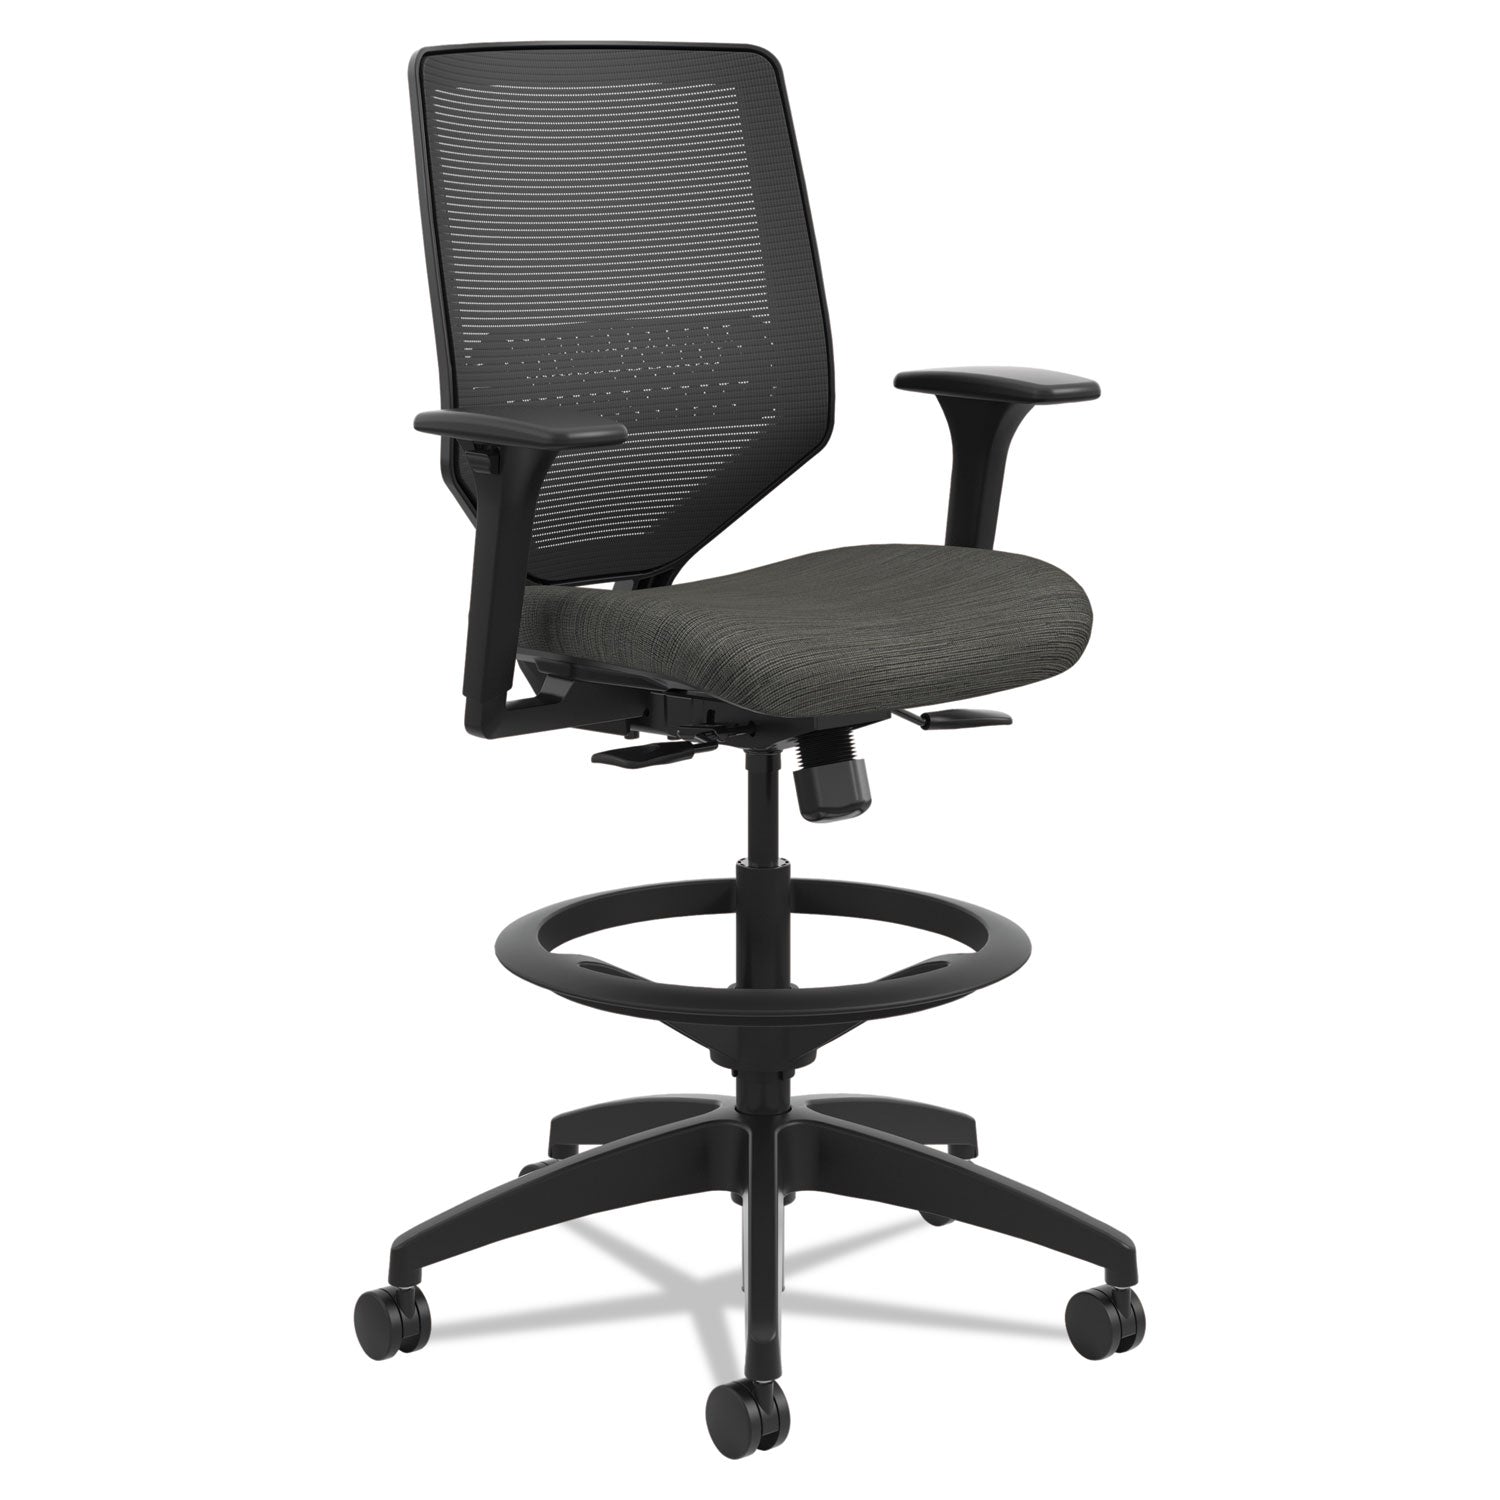 solve-series-mesh-back-task-stool-supports-up-to-300-lb-23-to-33-seat-height-ink-seat-back-black-base_honsvsm1alc10t - 1